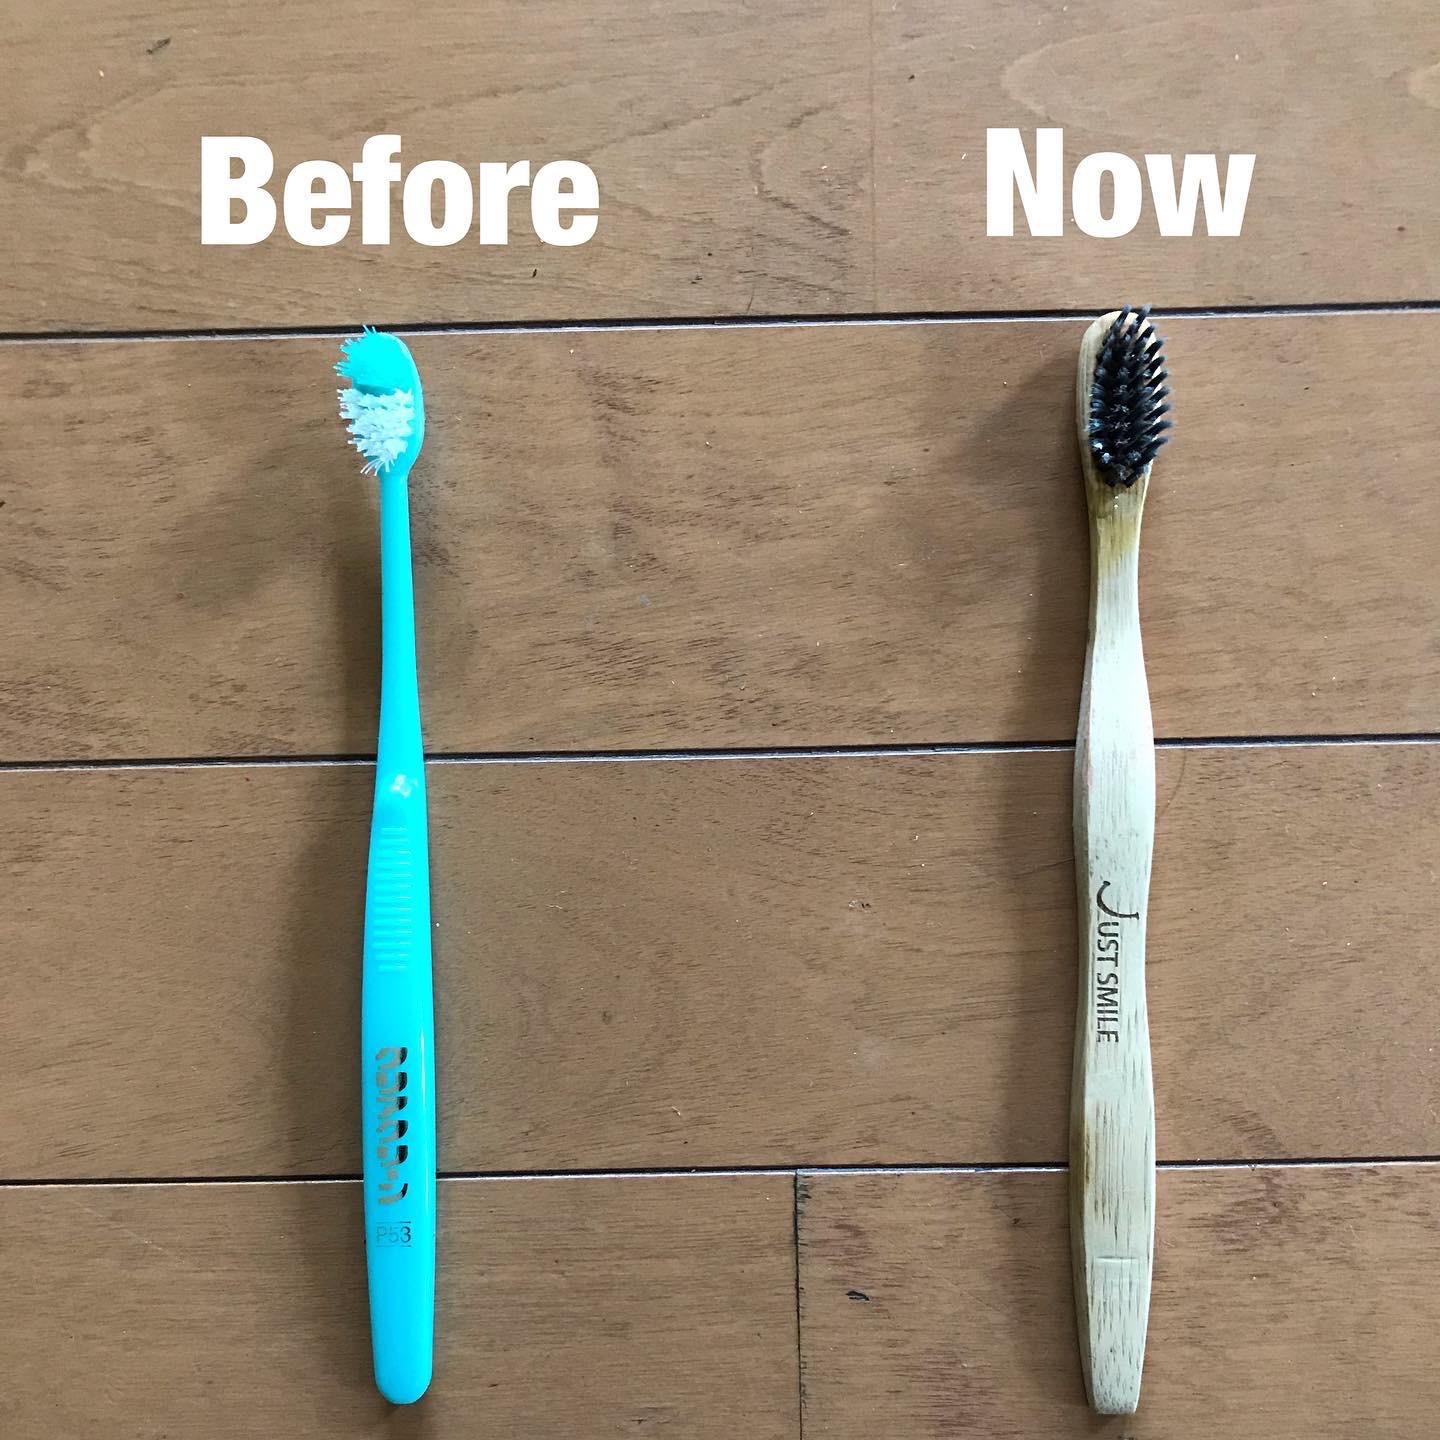 Before→I had used fancy plastic toothbrushes. However, plastic is not safe and plastic never goes away from the environment? Now→I use bamboo toothbrushes that are earth friendly and I don't have to feel bad about throwing them out. The bristles are very soft and gentle on teeth?